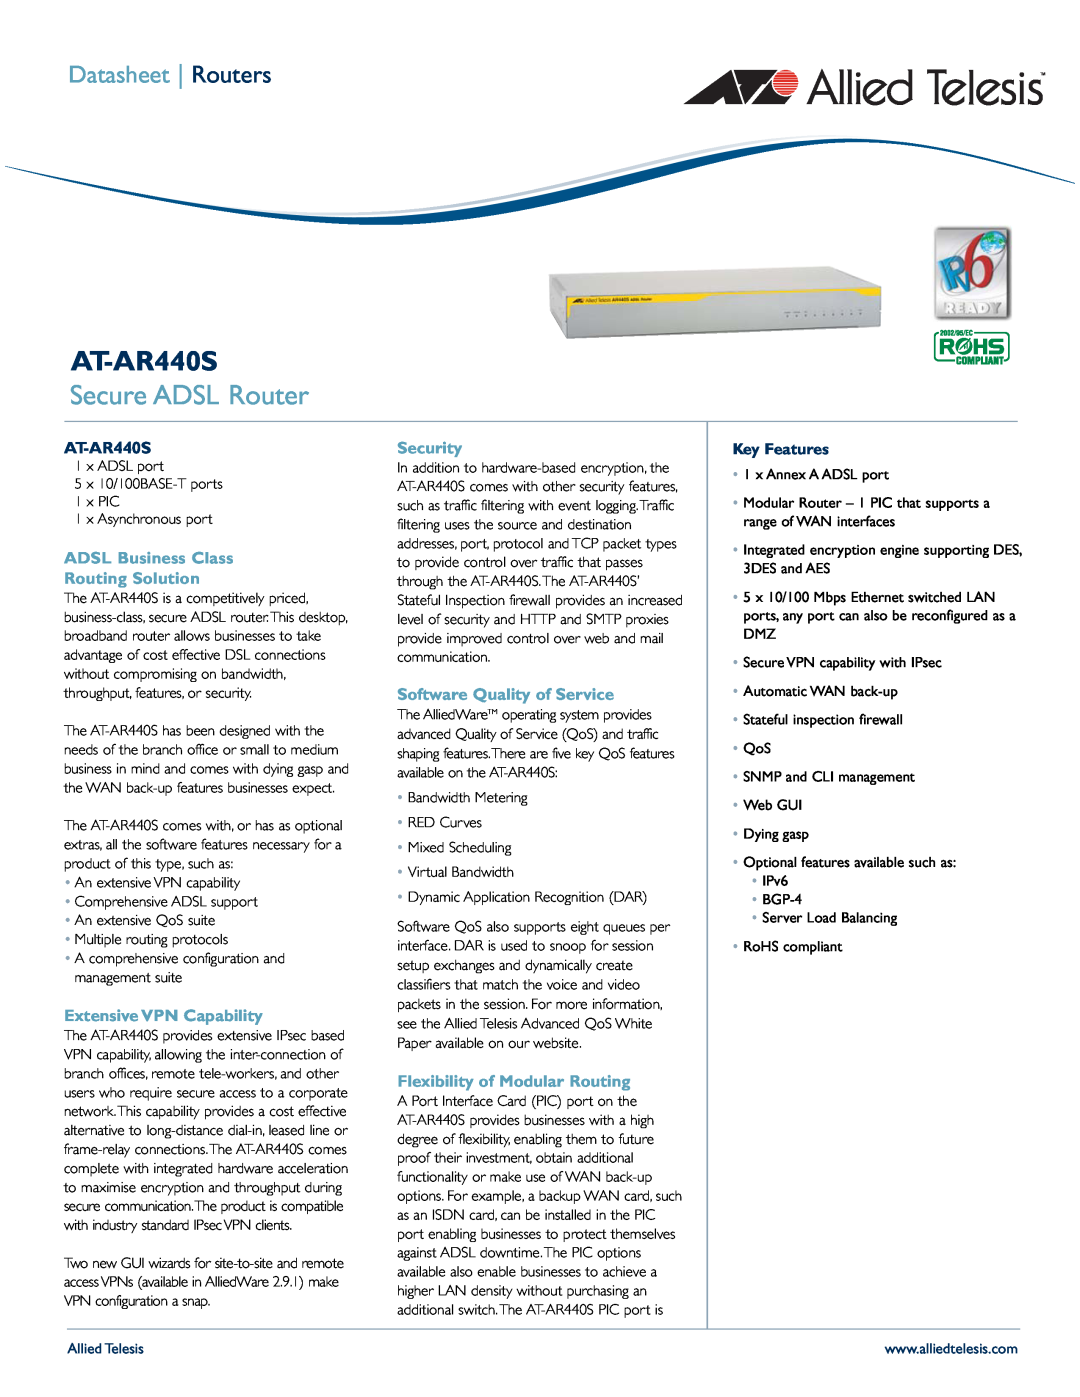 Allied Telesis AT-AR440S-10 manual Secure ADSL Router, Datasheet Routers, Key Features, Allied Telesis 